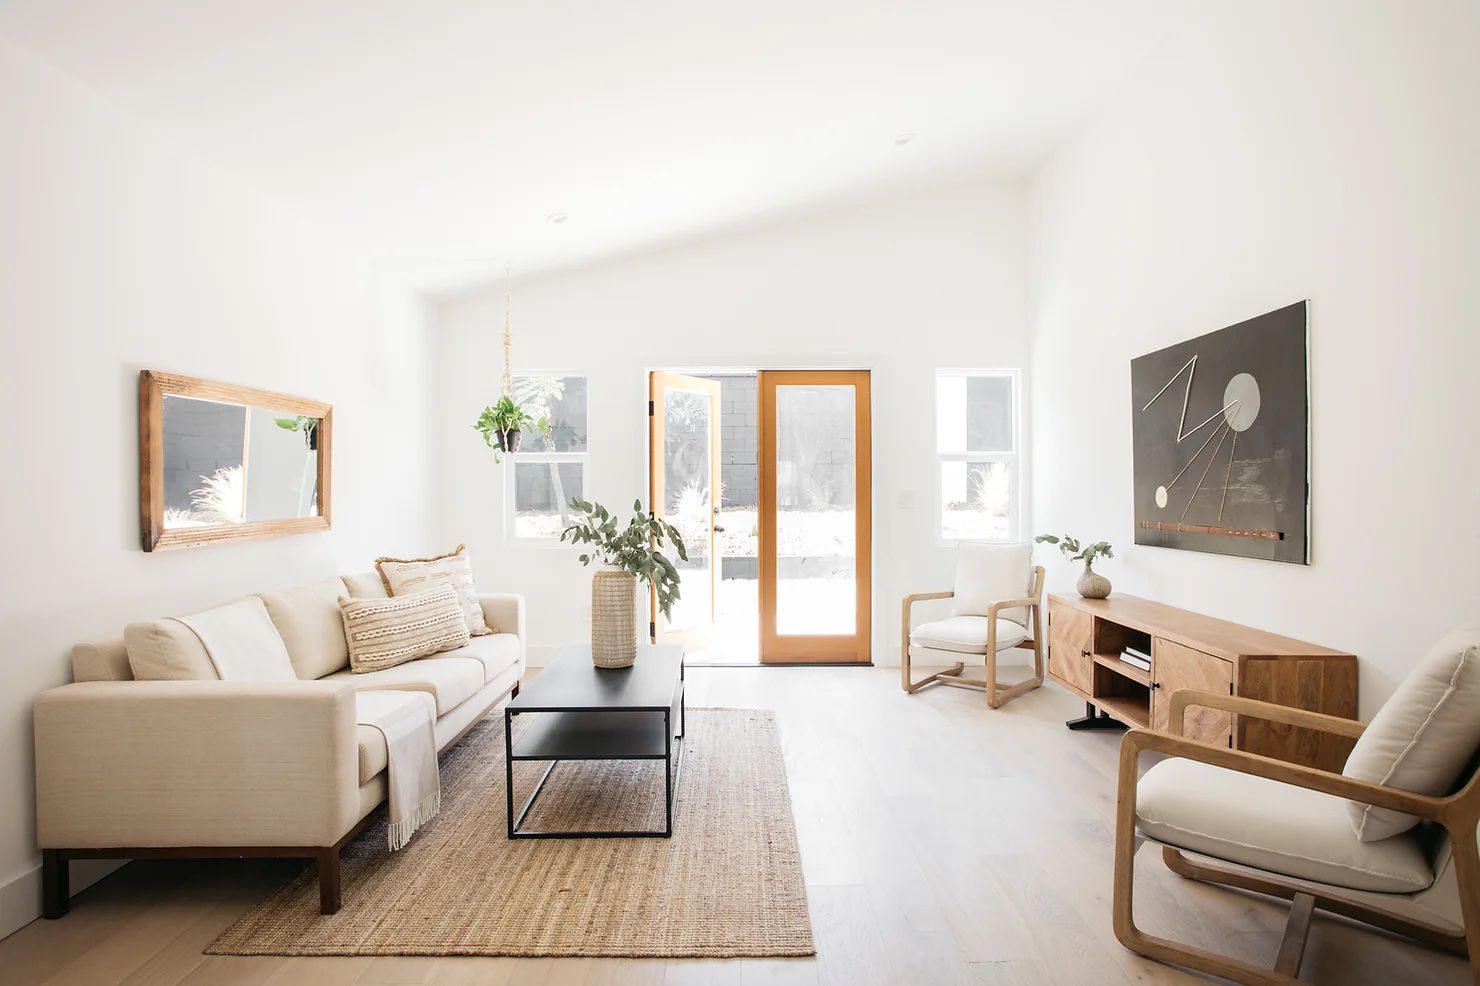 5 Things To Take Out Of A Living Room For A Minimalist Space